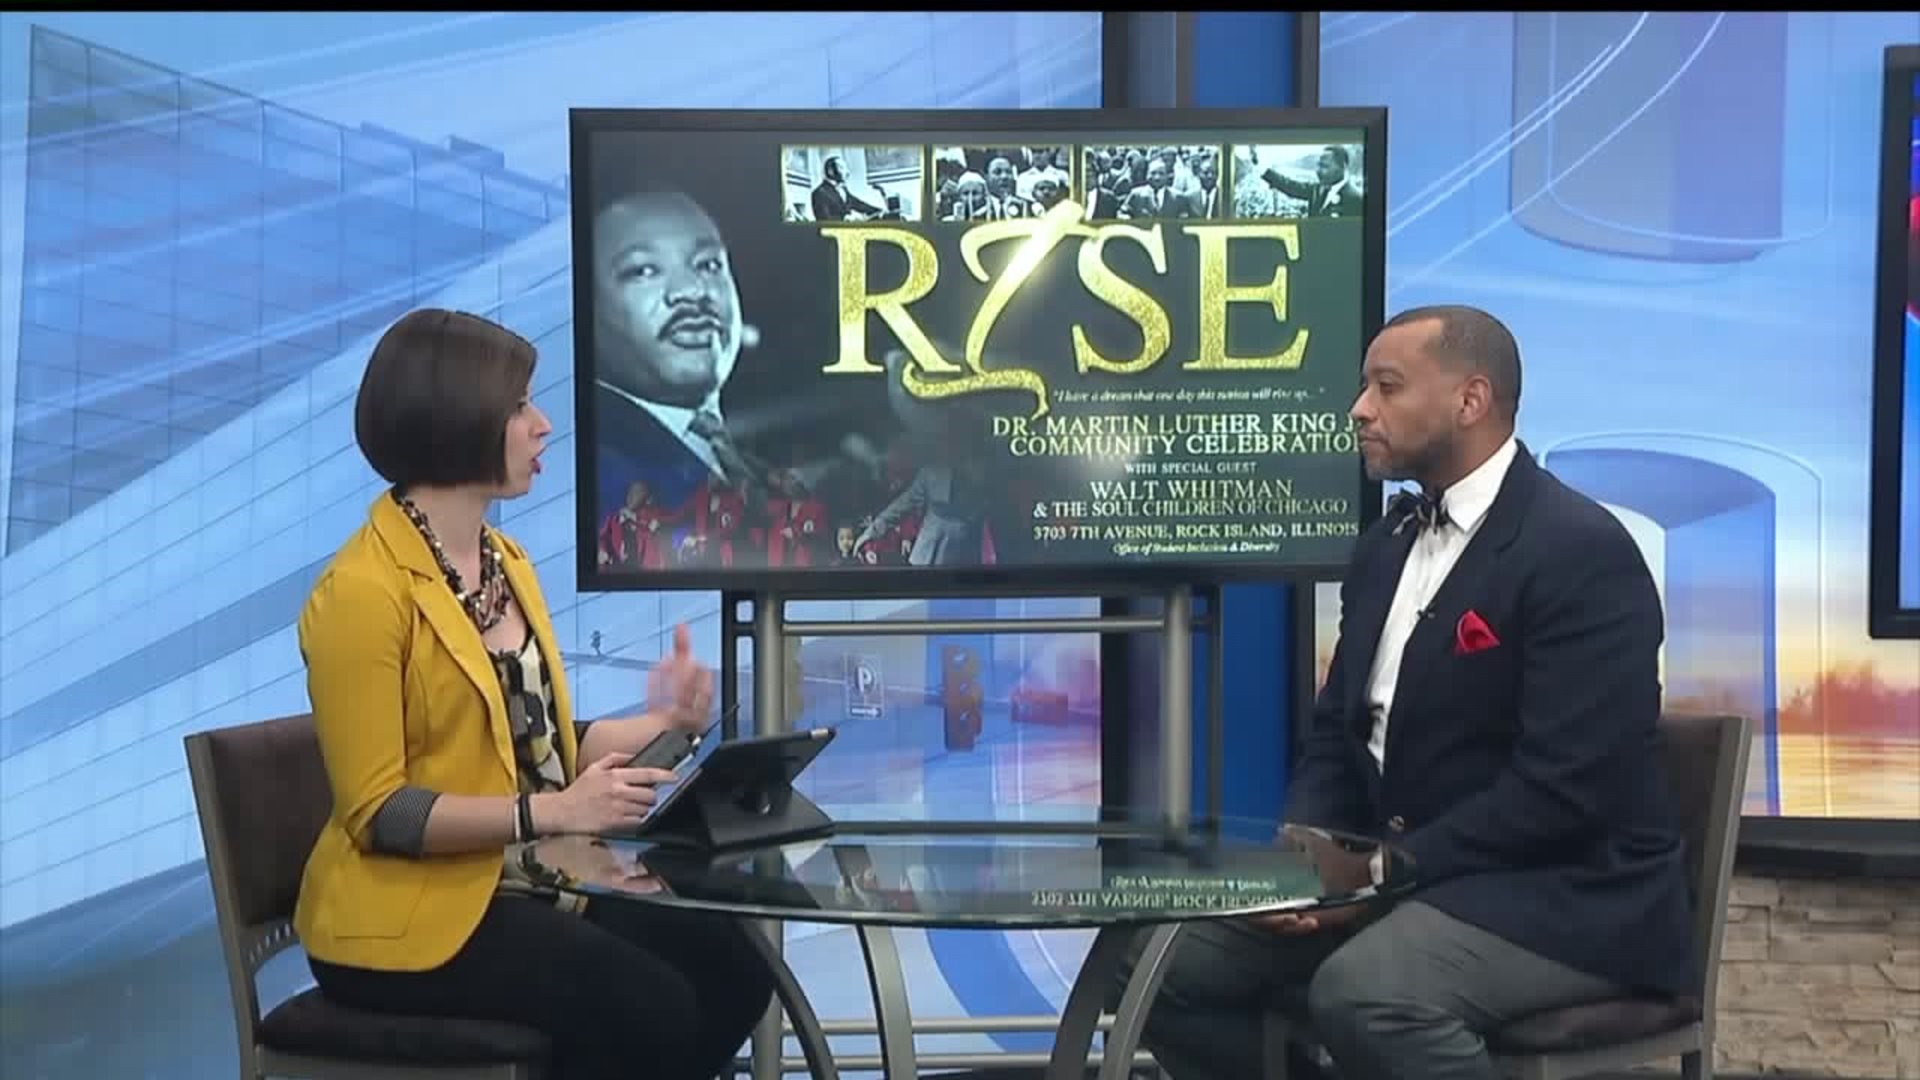 Digging Deeper into the Influence of Martin Luther King Jr.